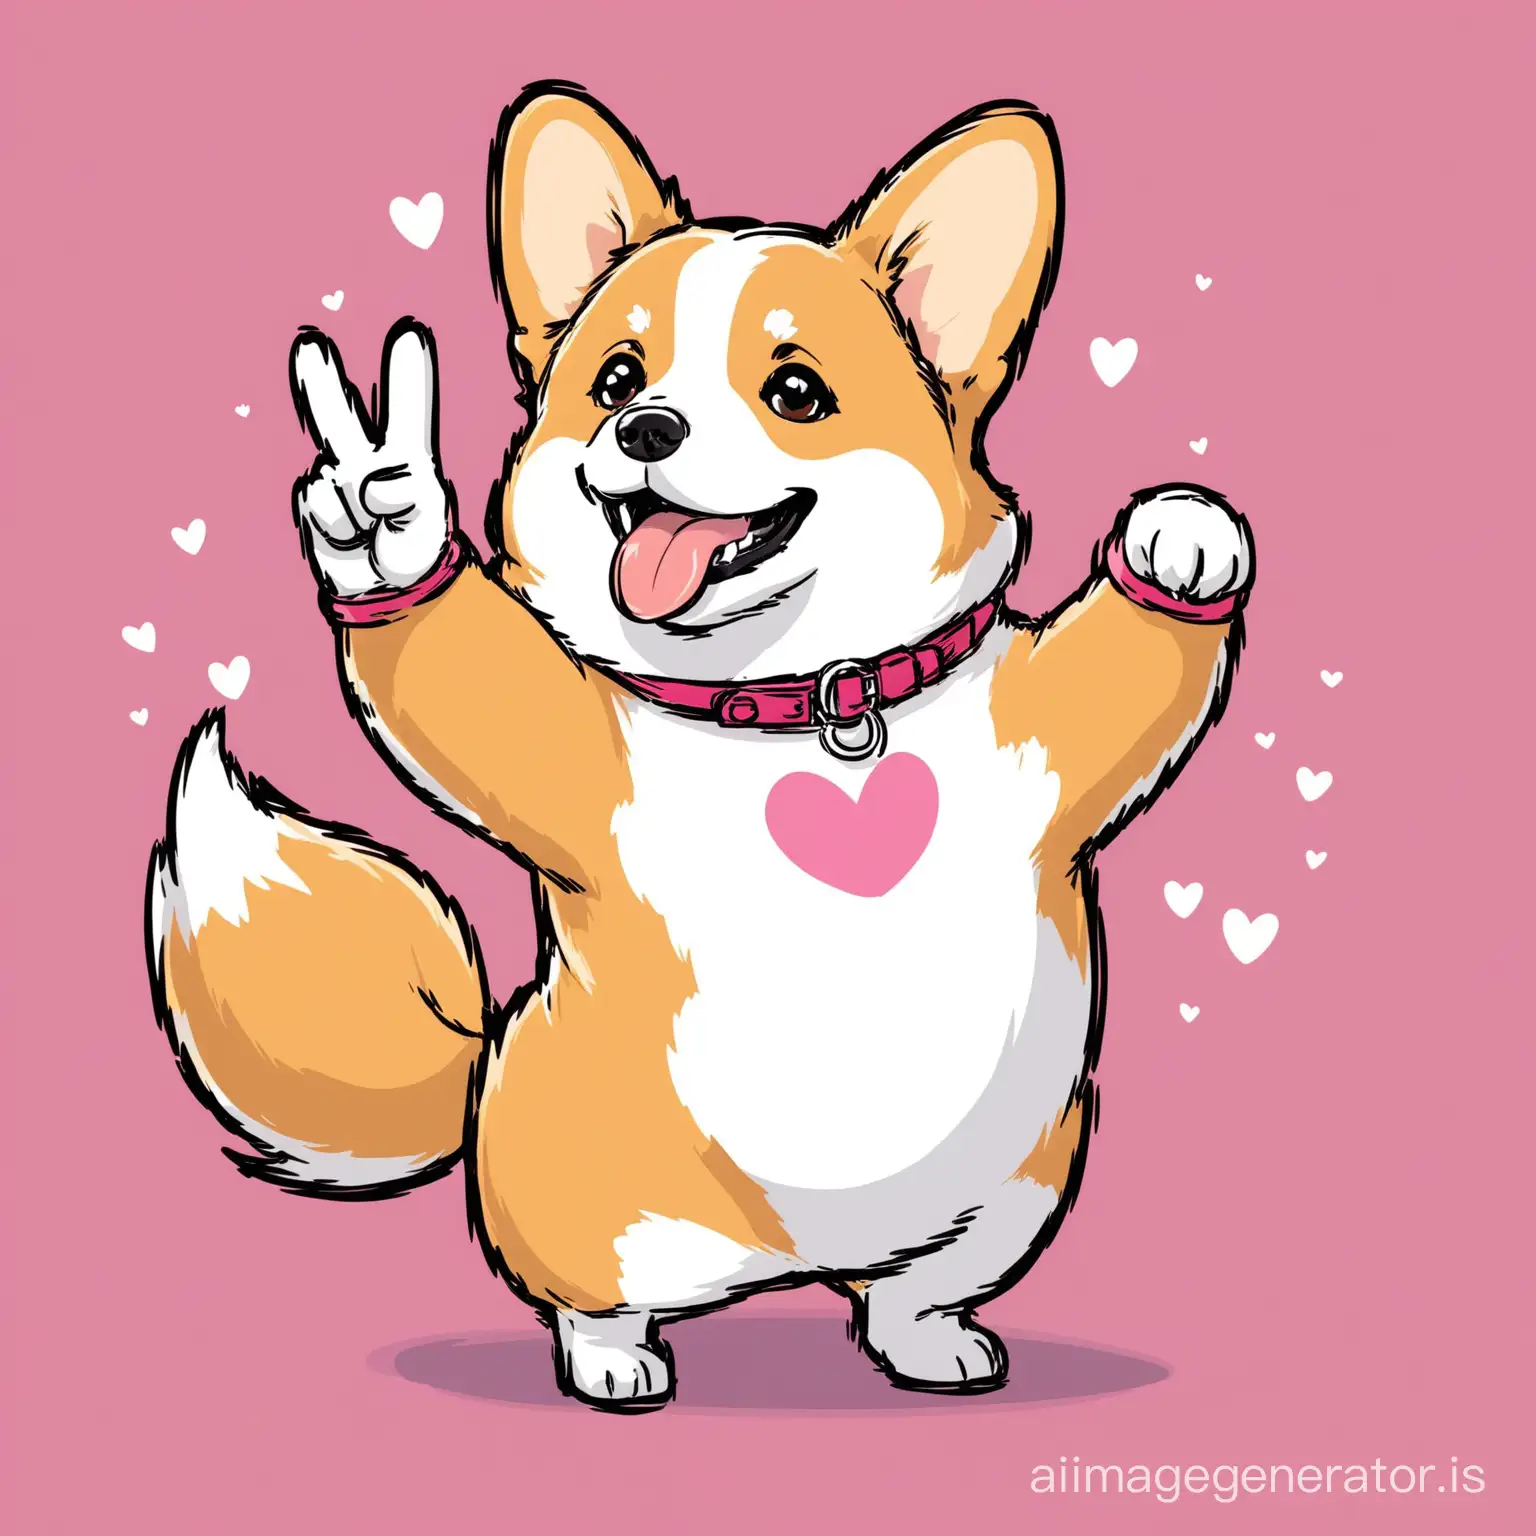 a corgi standing in his rear legs and sticking tongue to one side and making the peace and love sign with one hand no bows or other decorations